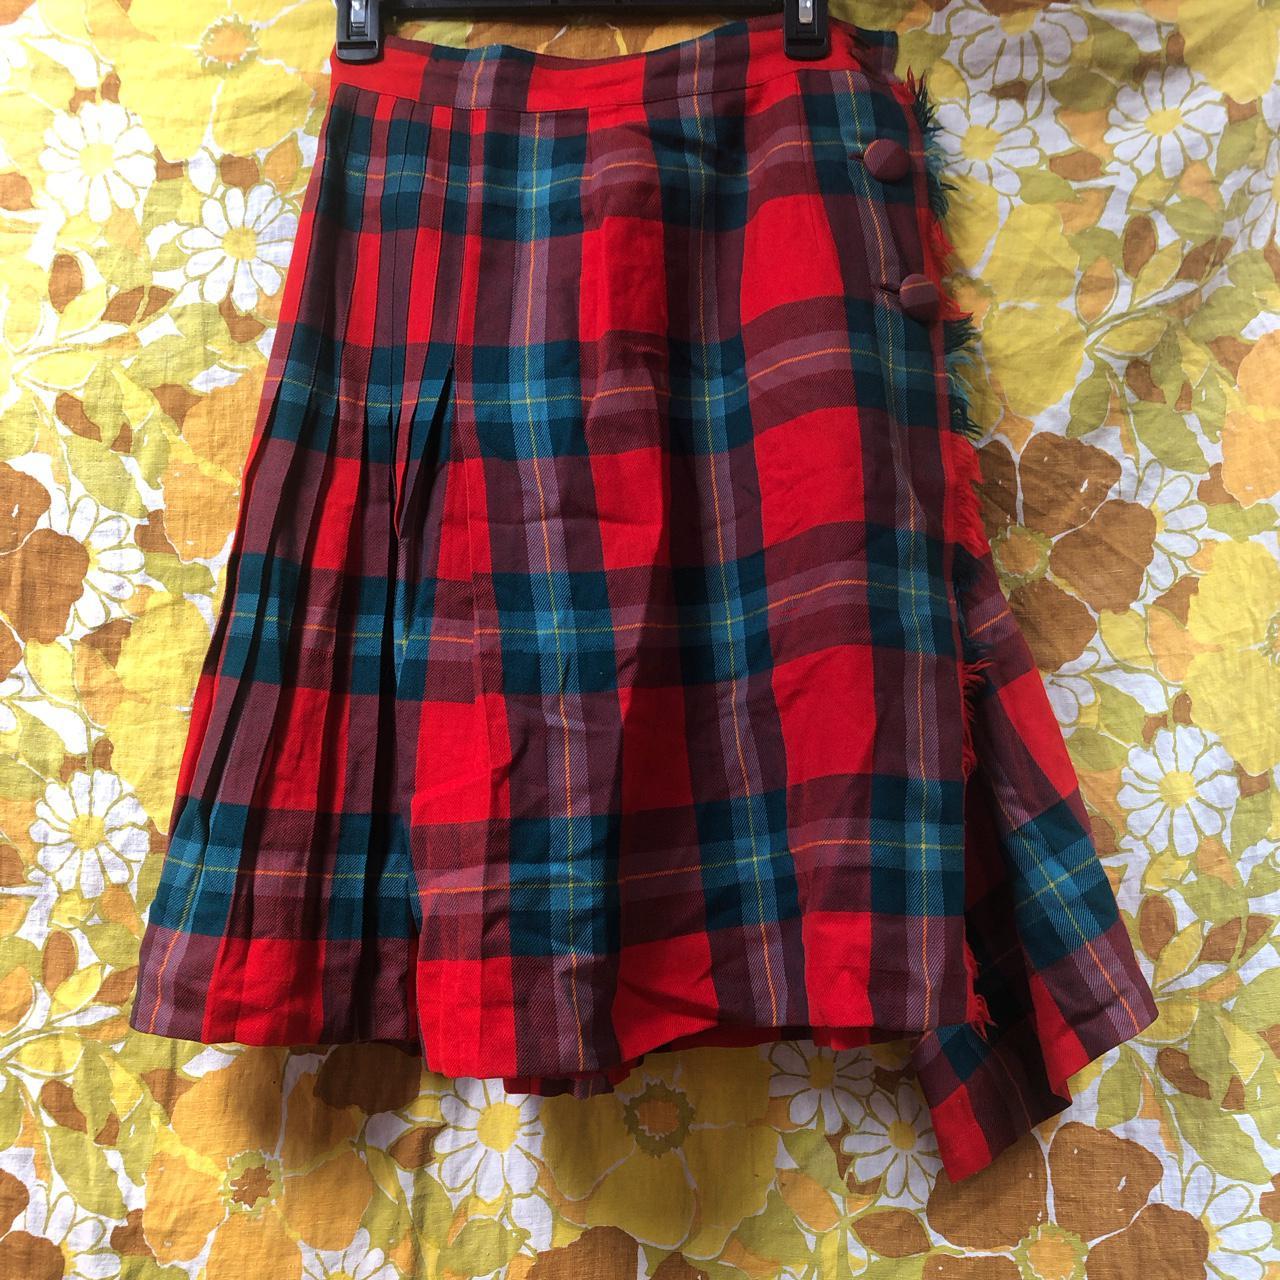 Authentic vintage 70s/80s plaid skirt! In very good... - Depop